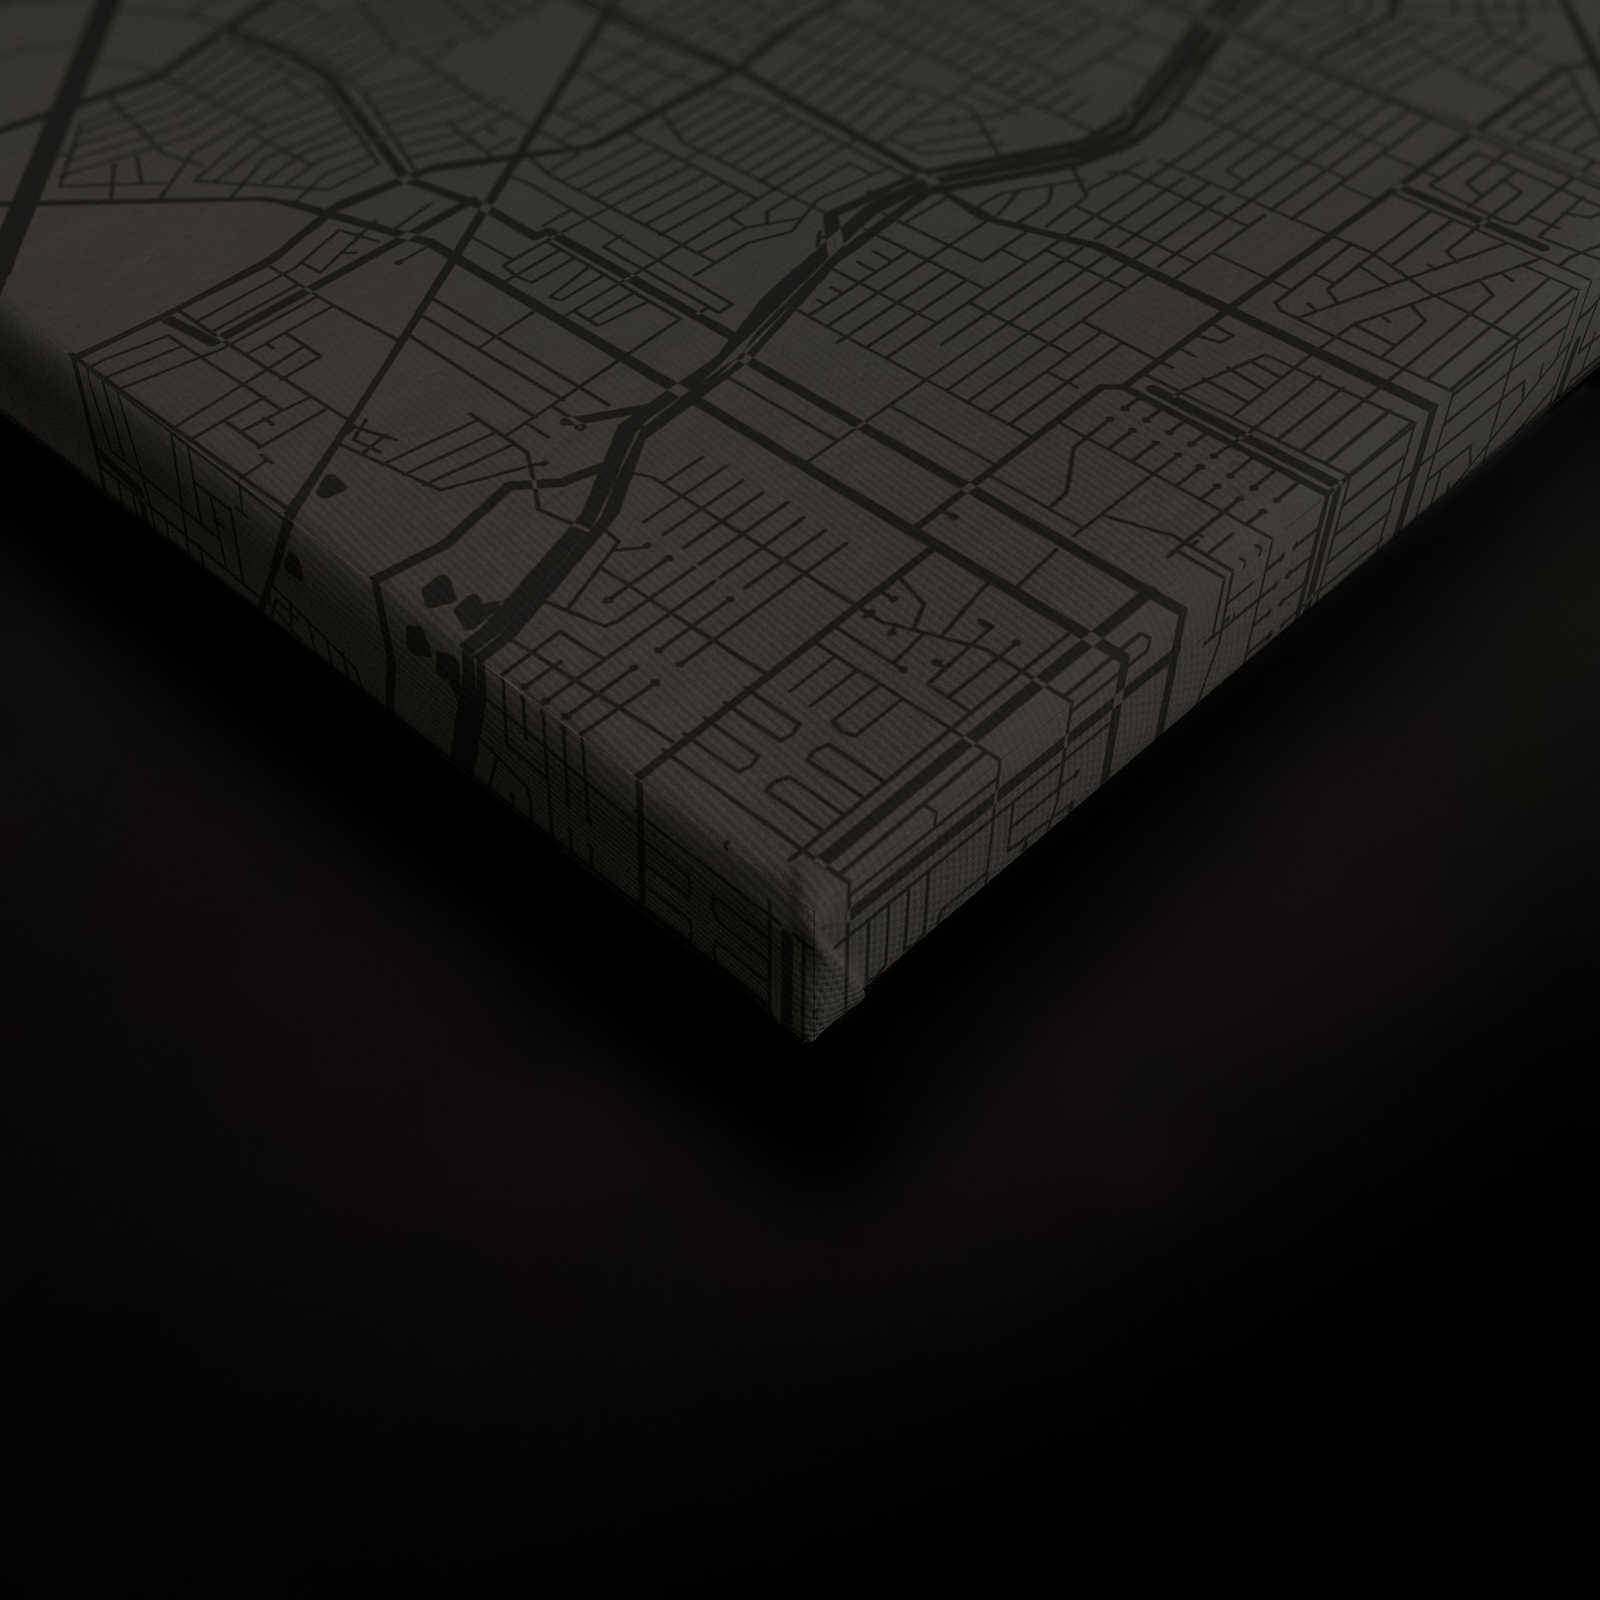             Canvas painting City Map with Street Course | black - 0,90 m x 0,60 m
        